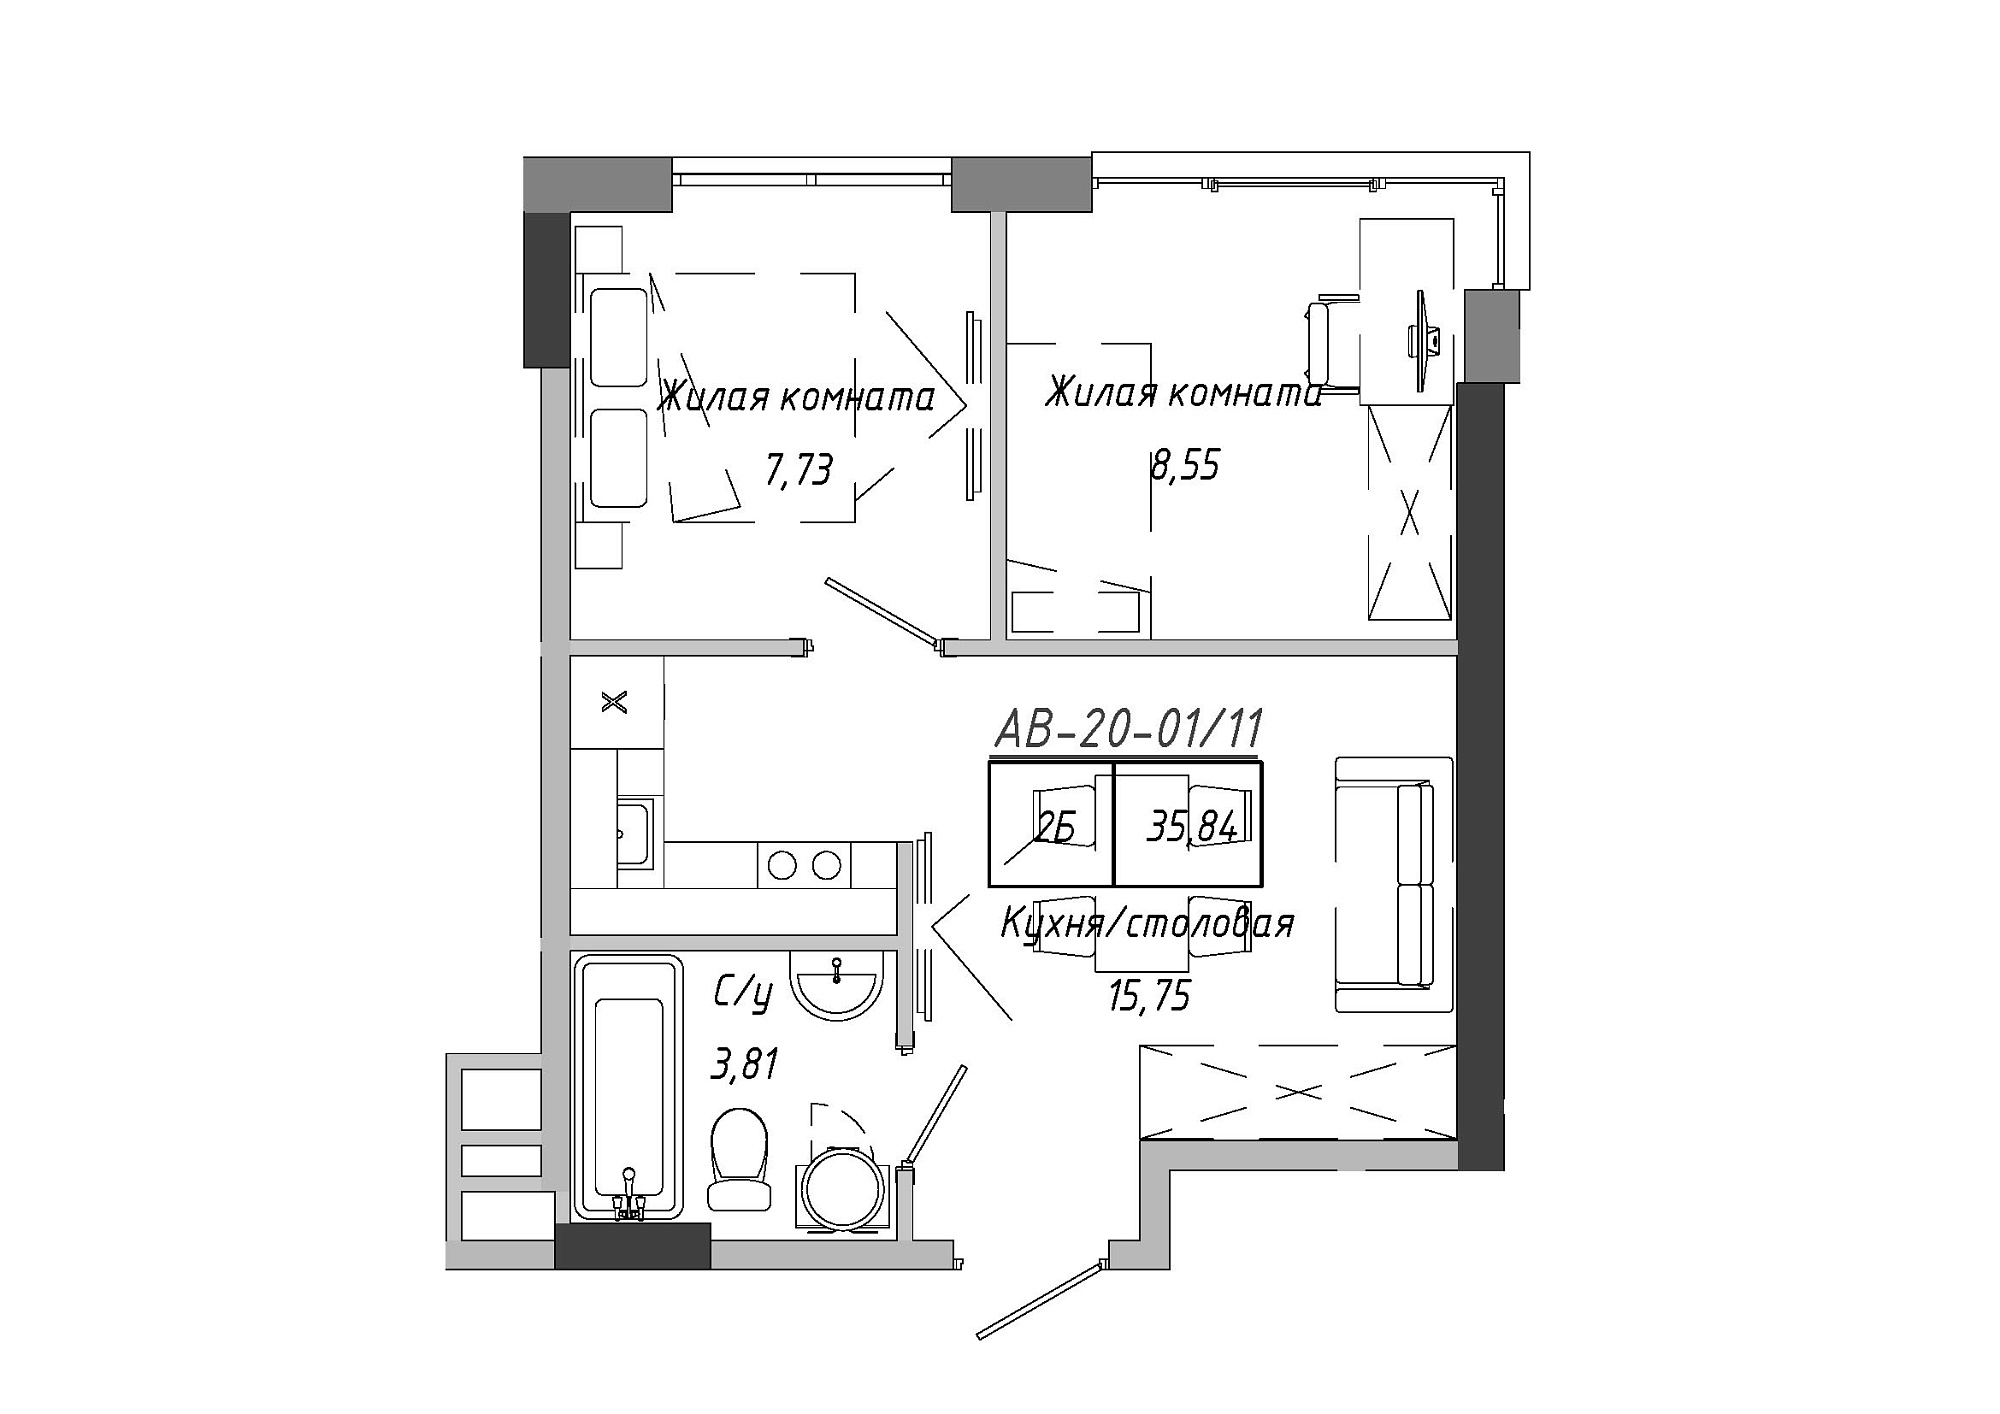 Planning 2-rm flats area 35.75m2, AB-20-01/00011.